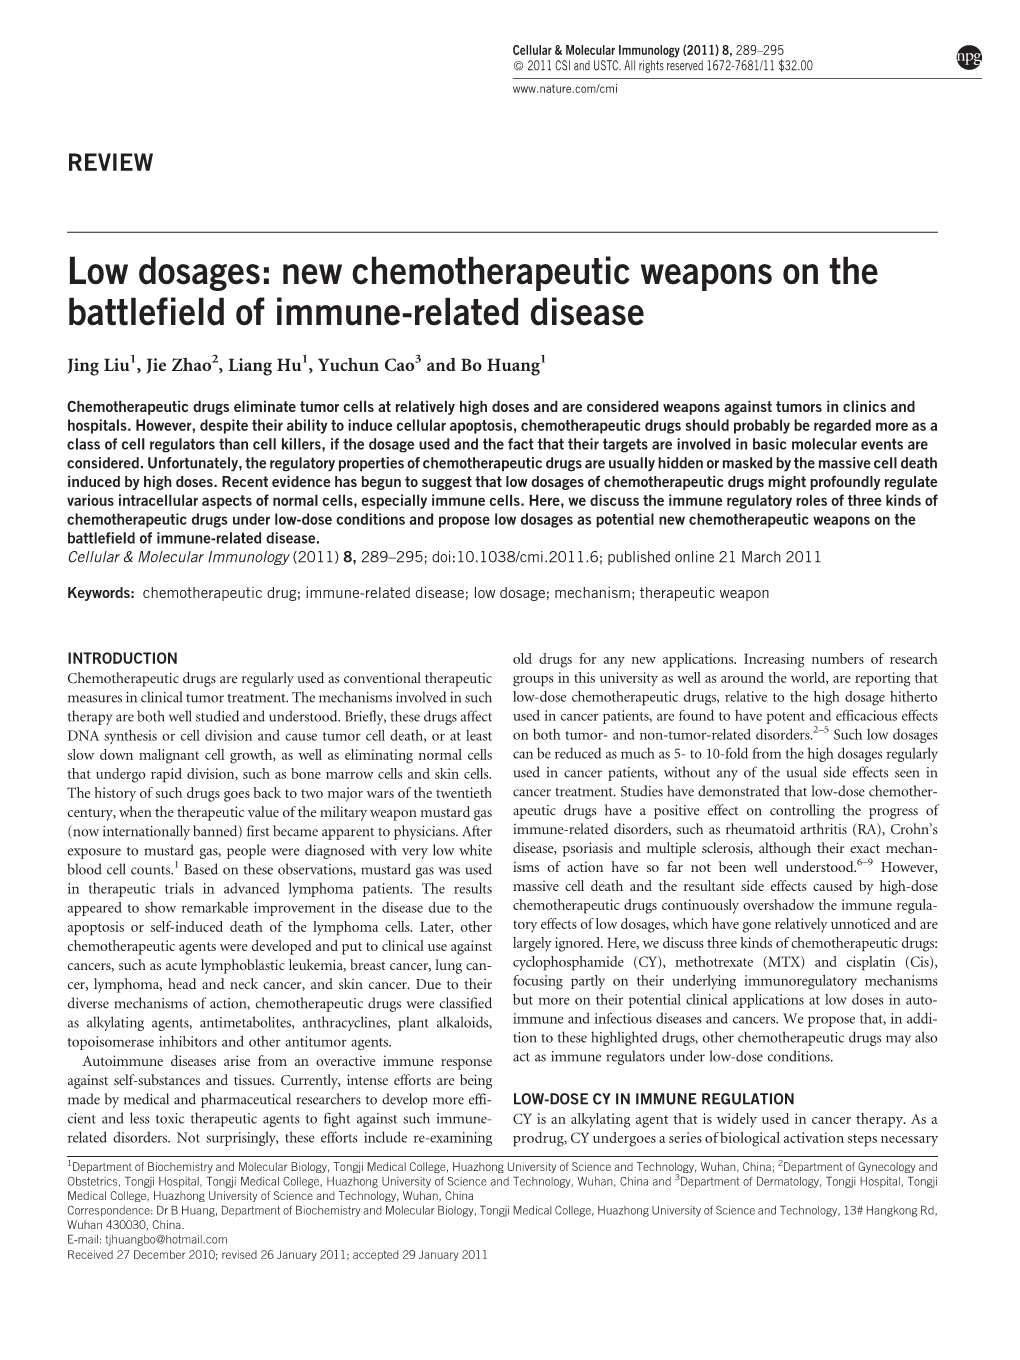 New Chemotherapeutic Weapons on the Battlefield of Immune-Related Disease